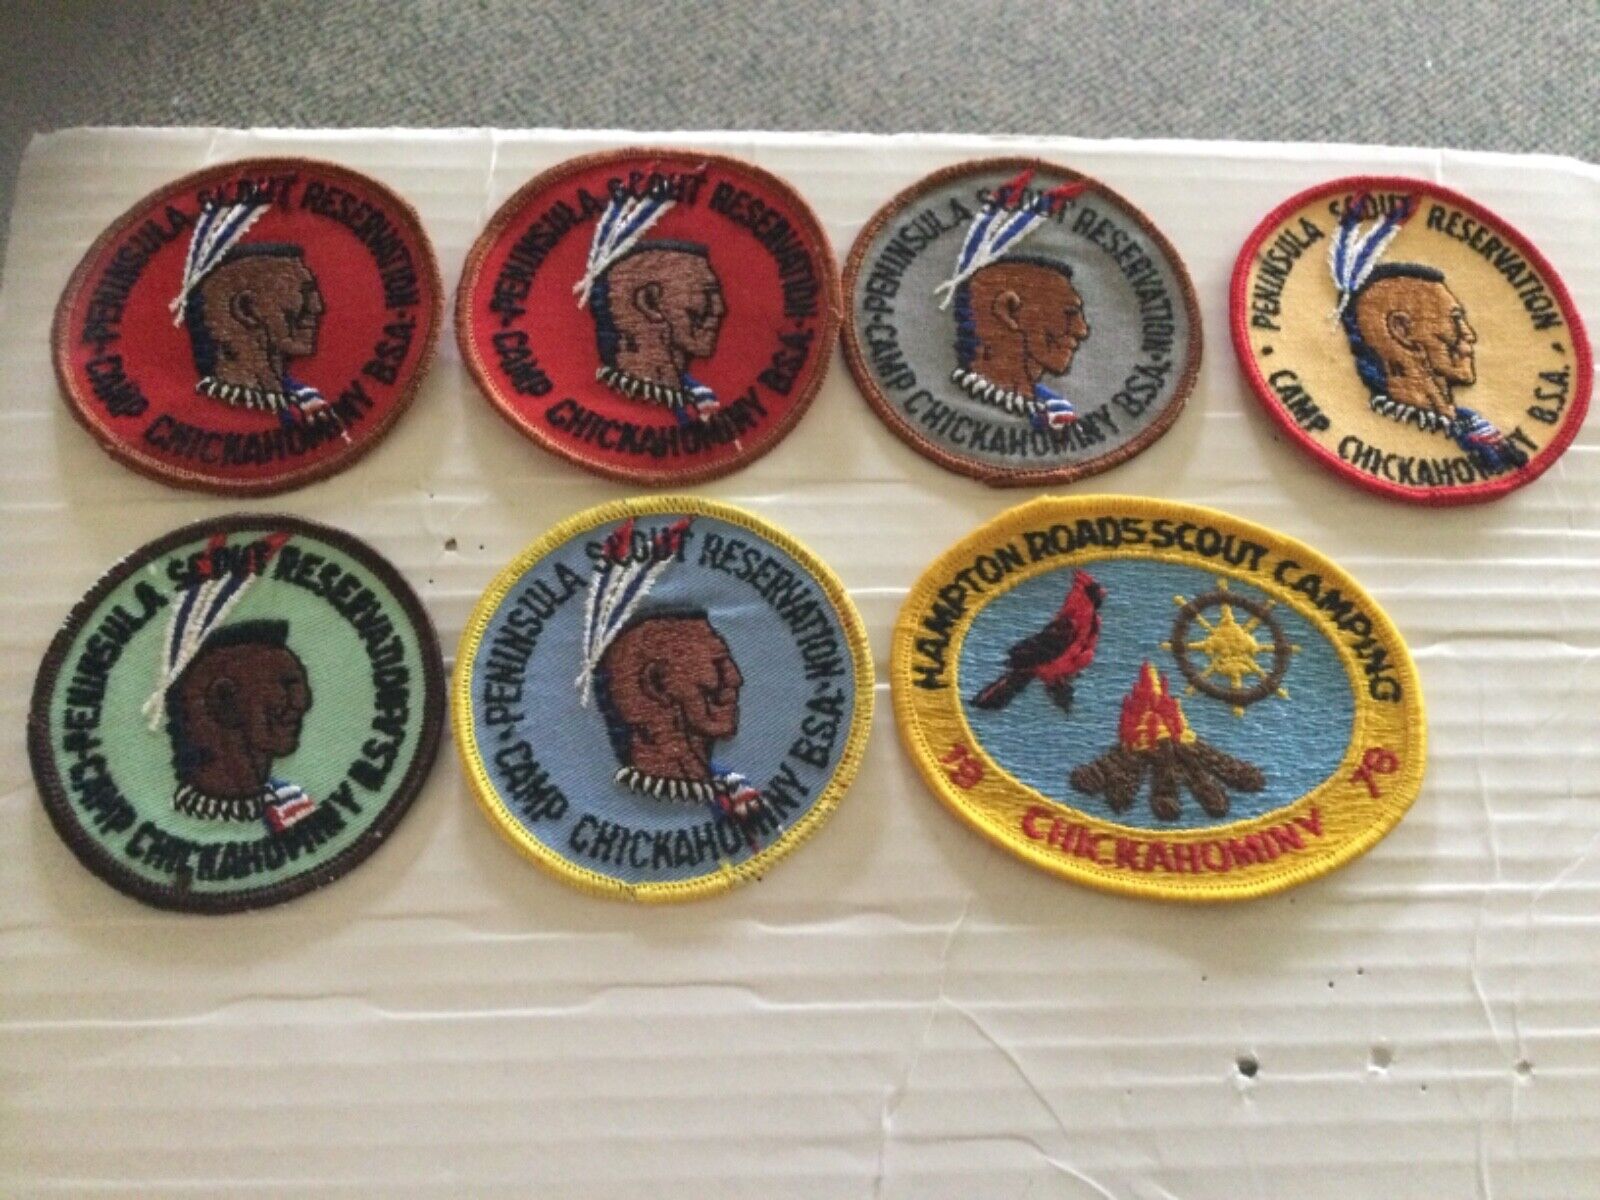 Peninsula Scout Reservation Camp Chickahominy lot of 7 Patches SALE